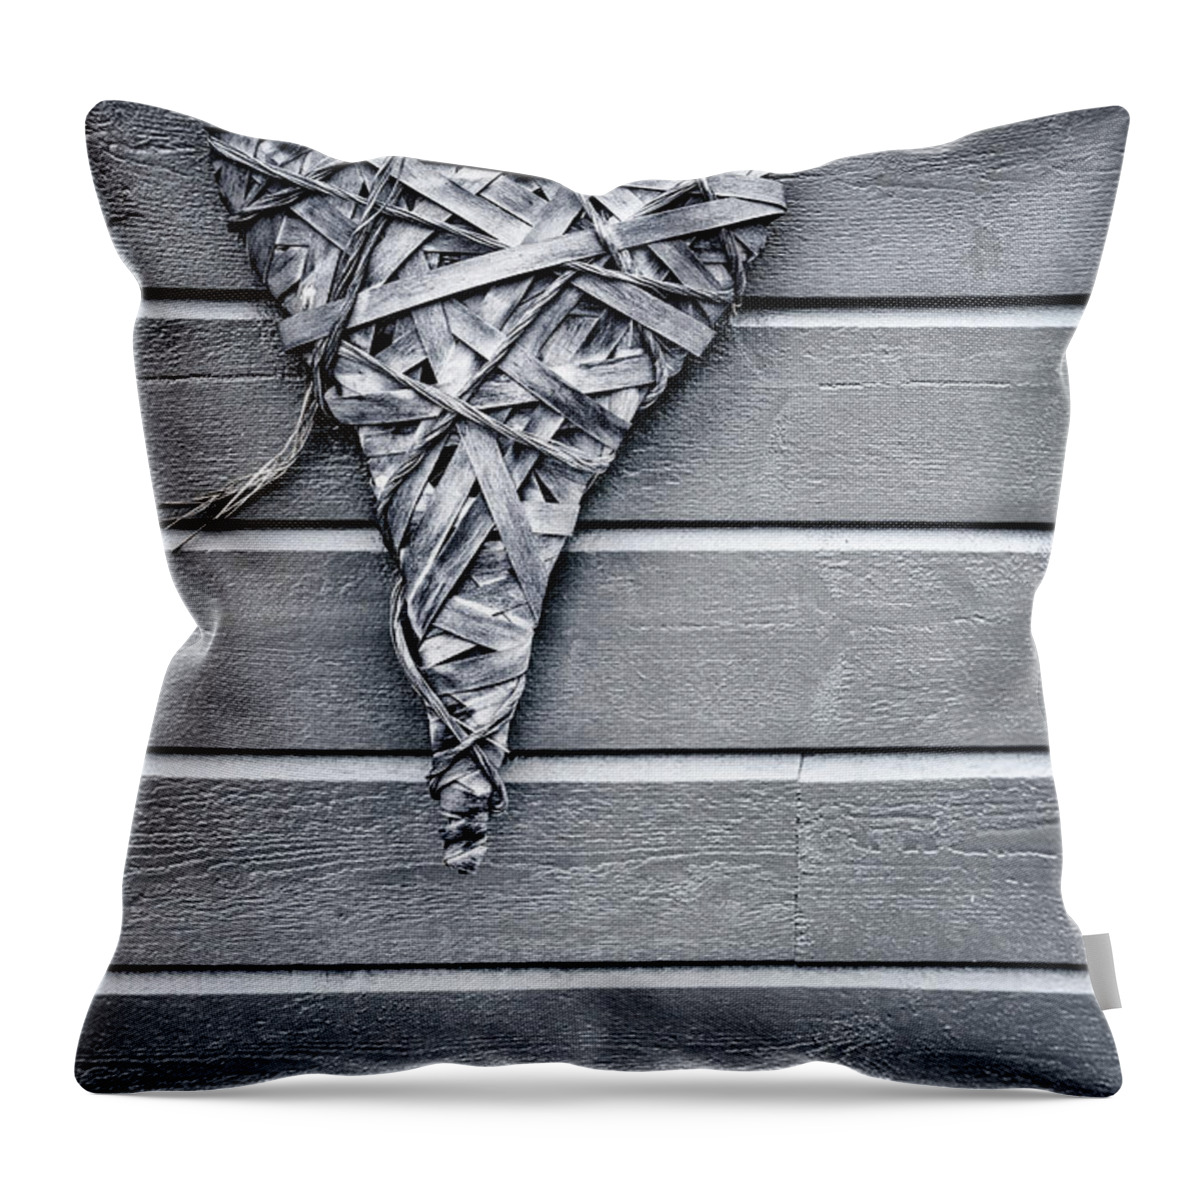 Kremsdorf Throw Pillow featuring the photograph Wrapped In Your Heart by Evelina Kremsdorf